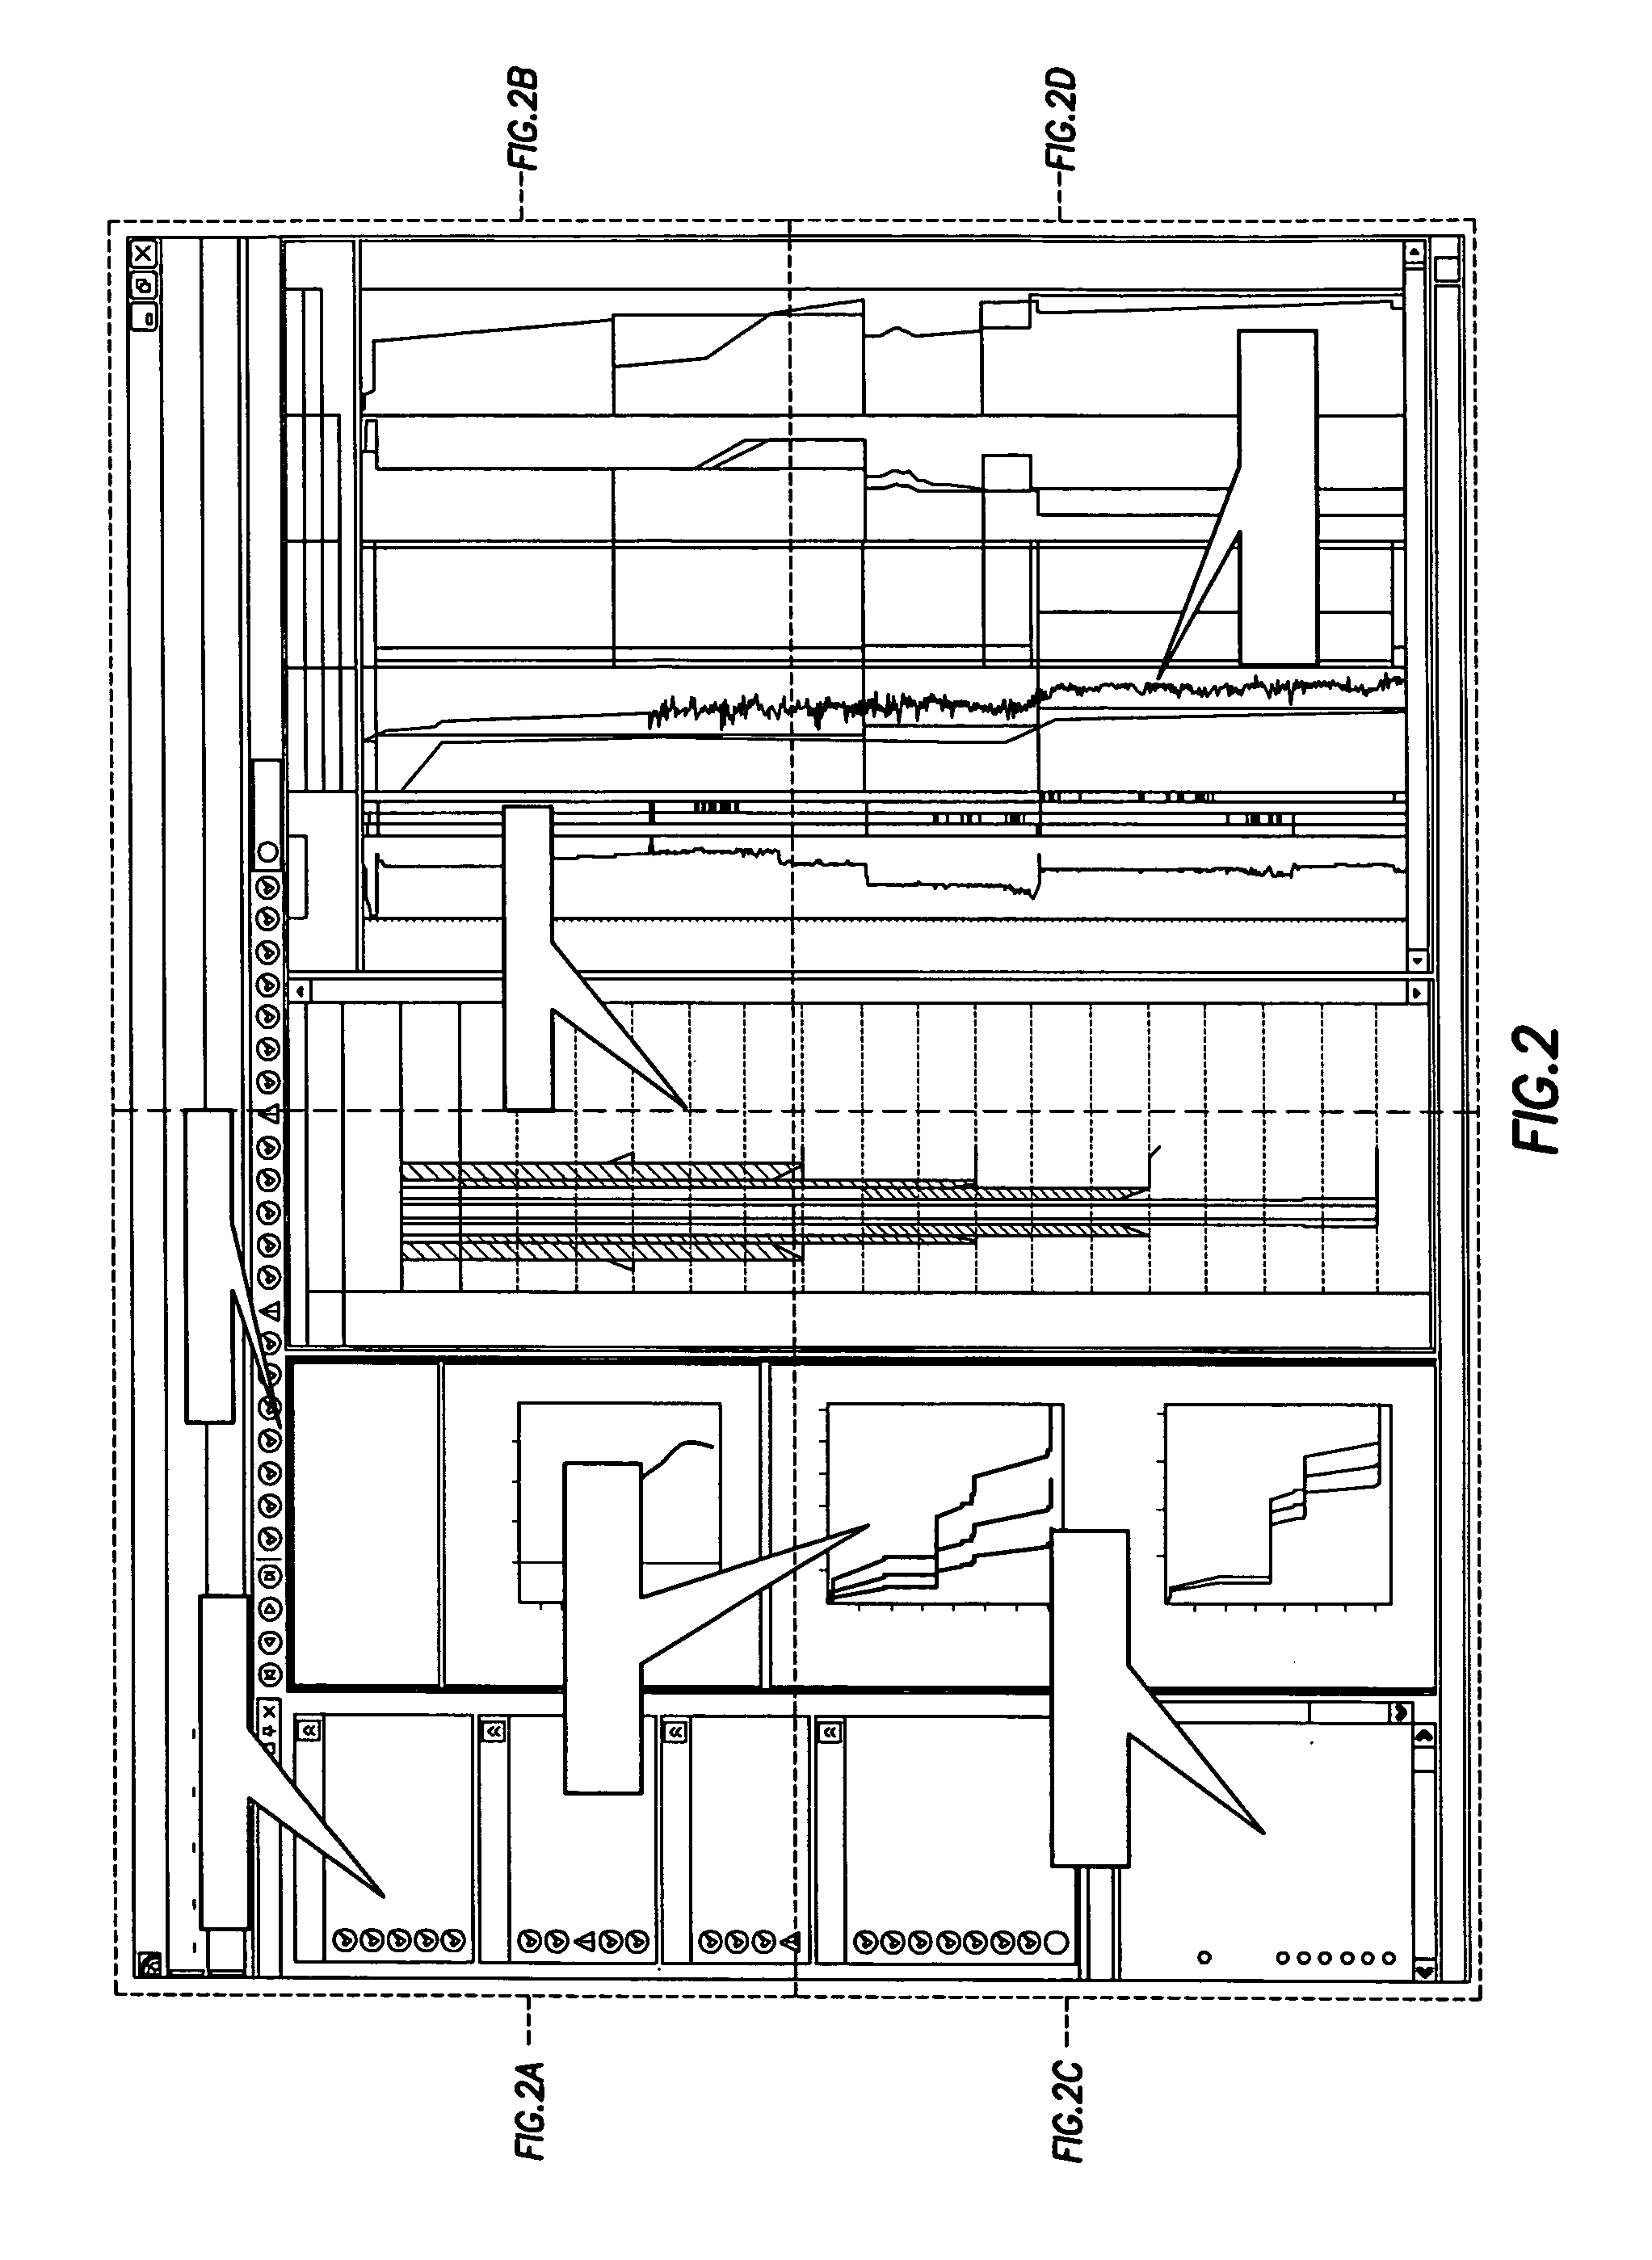 Method and apparatus and program storage device adapted for automatic qualitative and quantitative risk assesssment based on technical wellbore design and earth properties